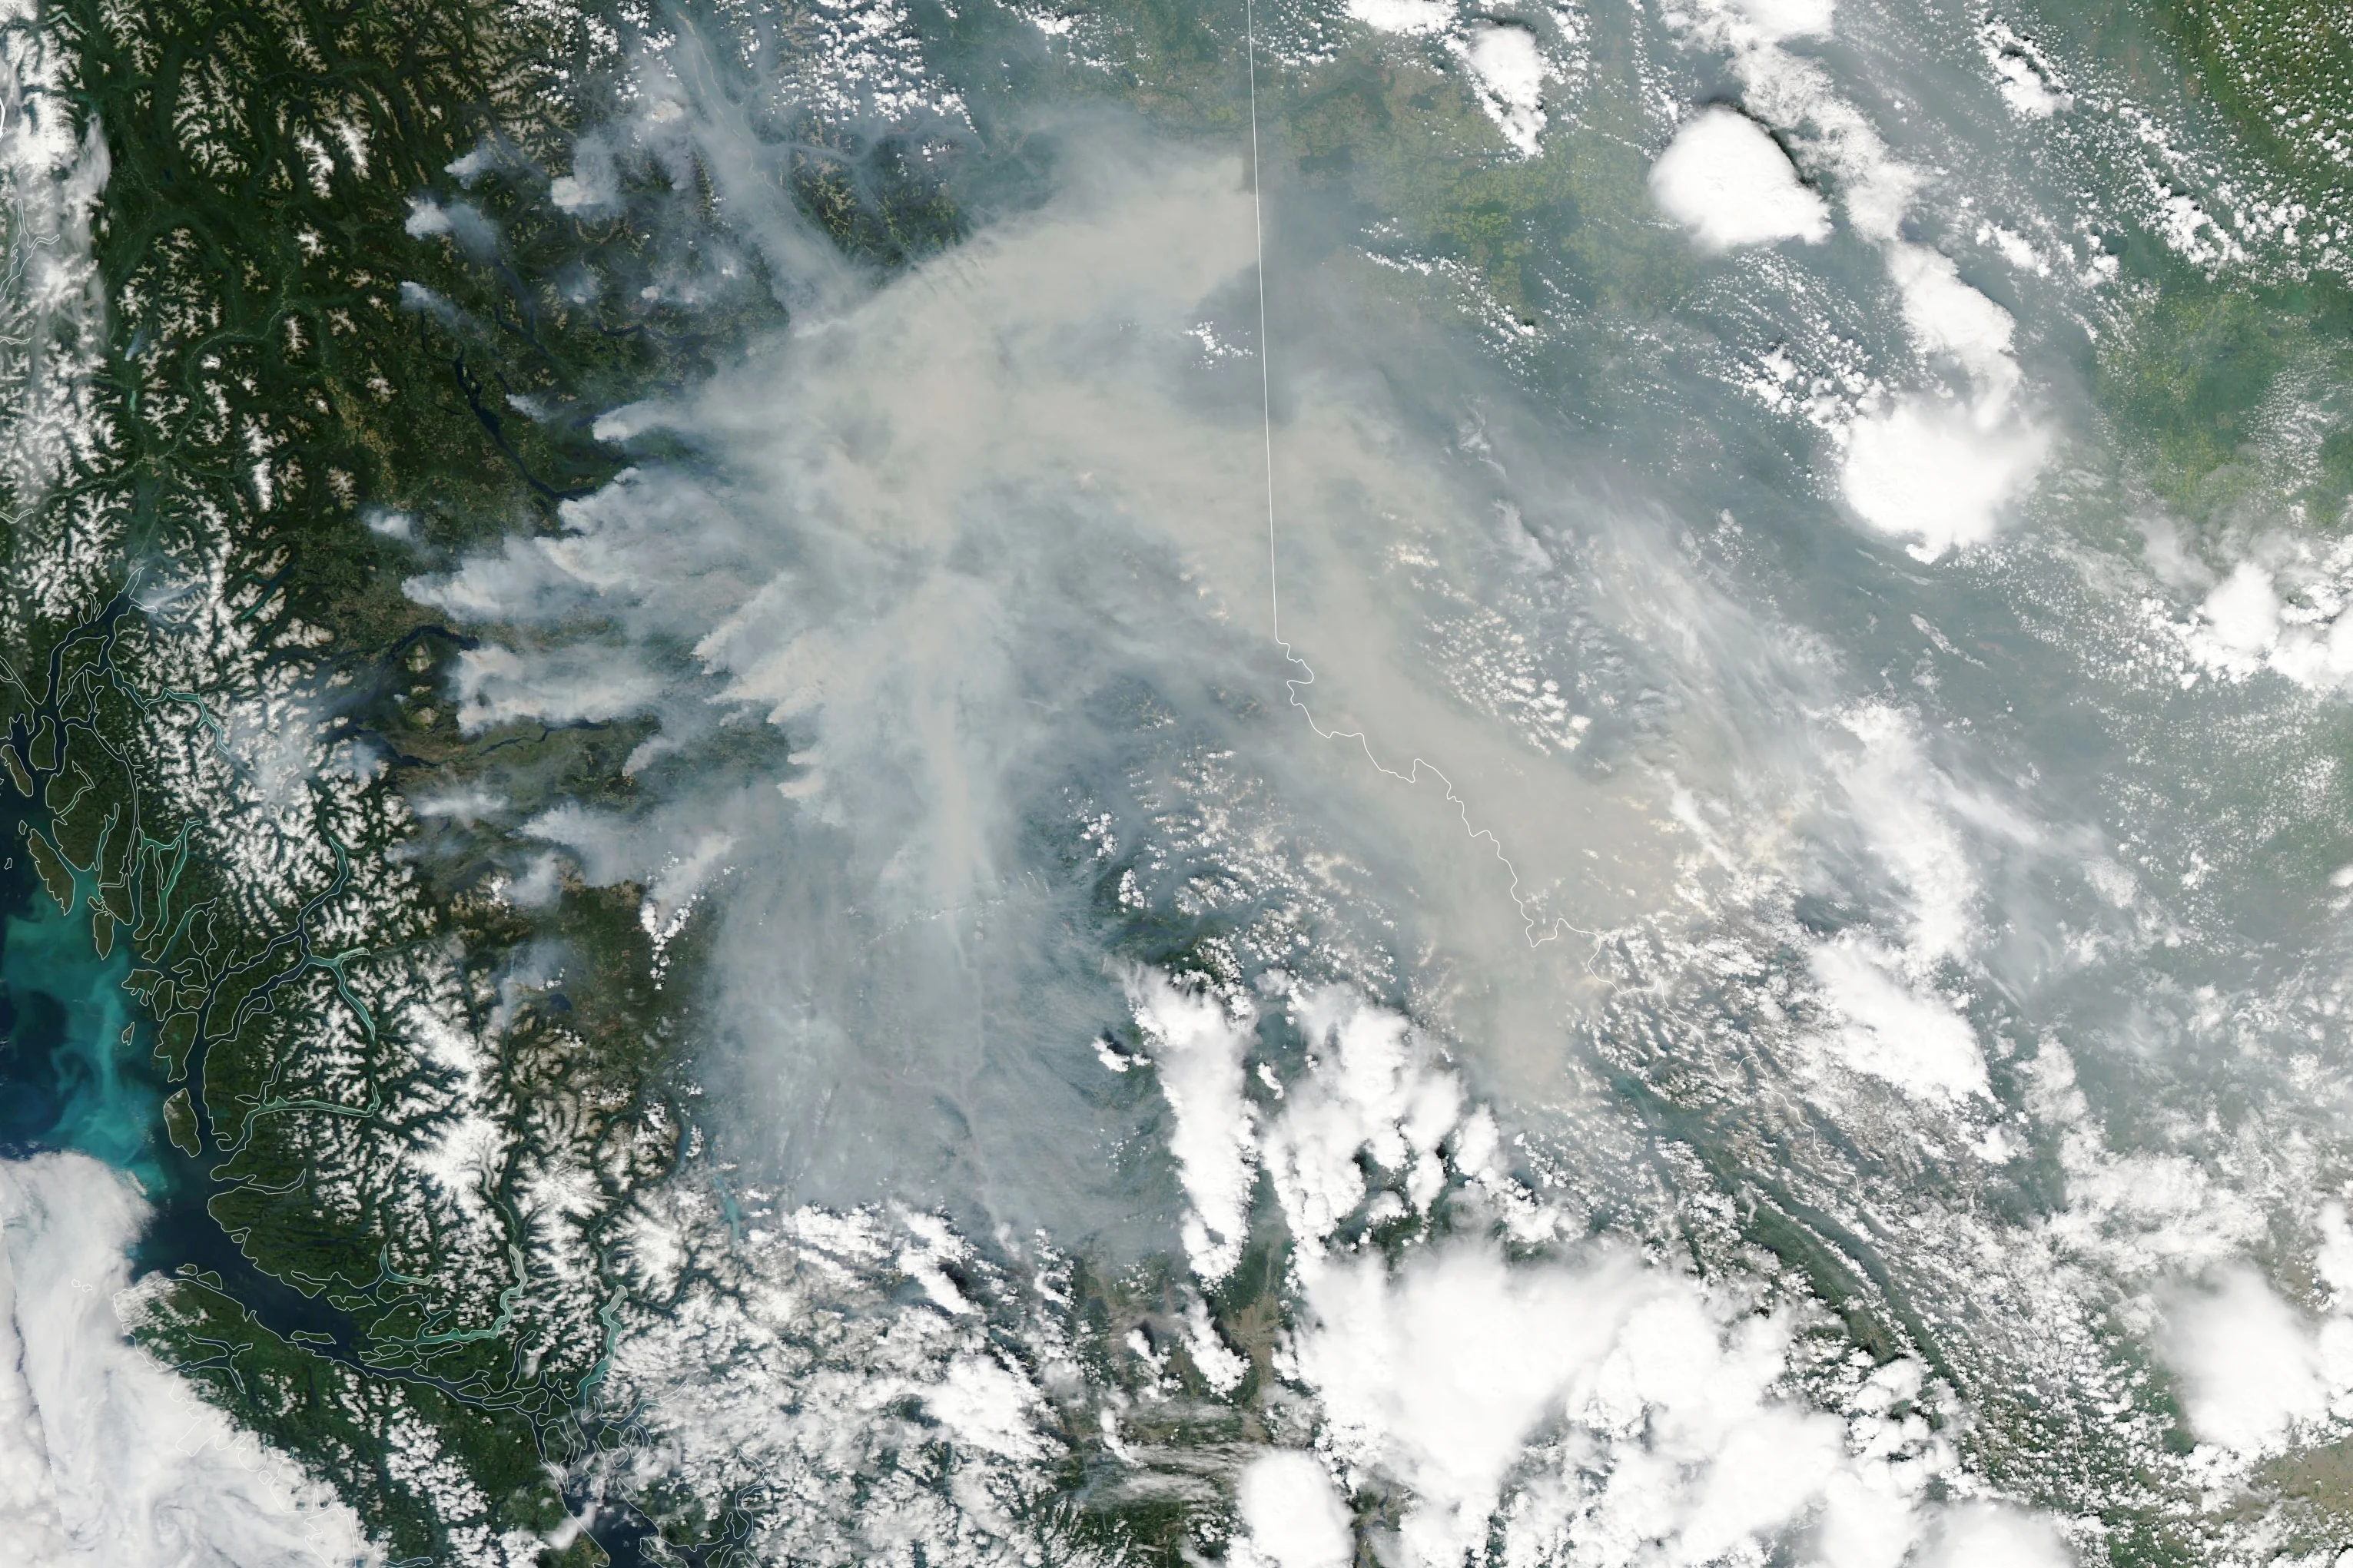 Wildfire smoke in your eyes? Doctors say we need to study long-term impacts